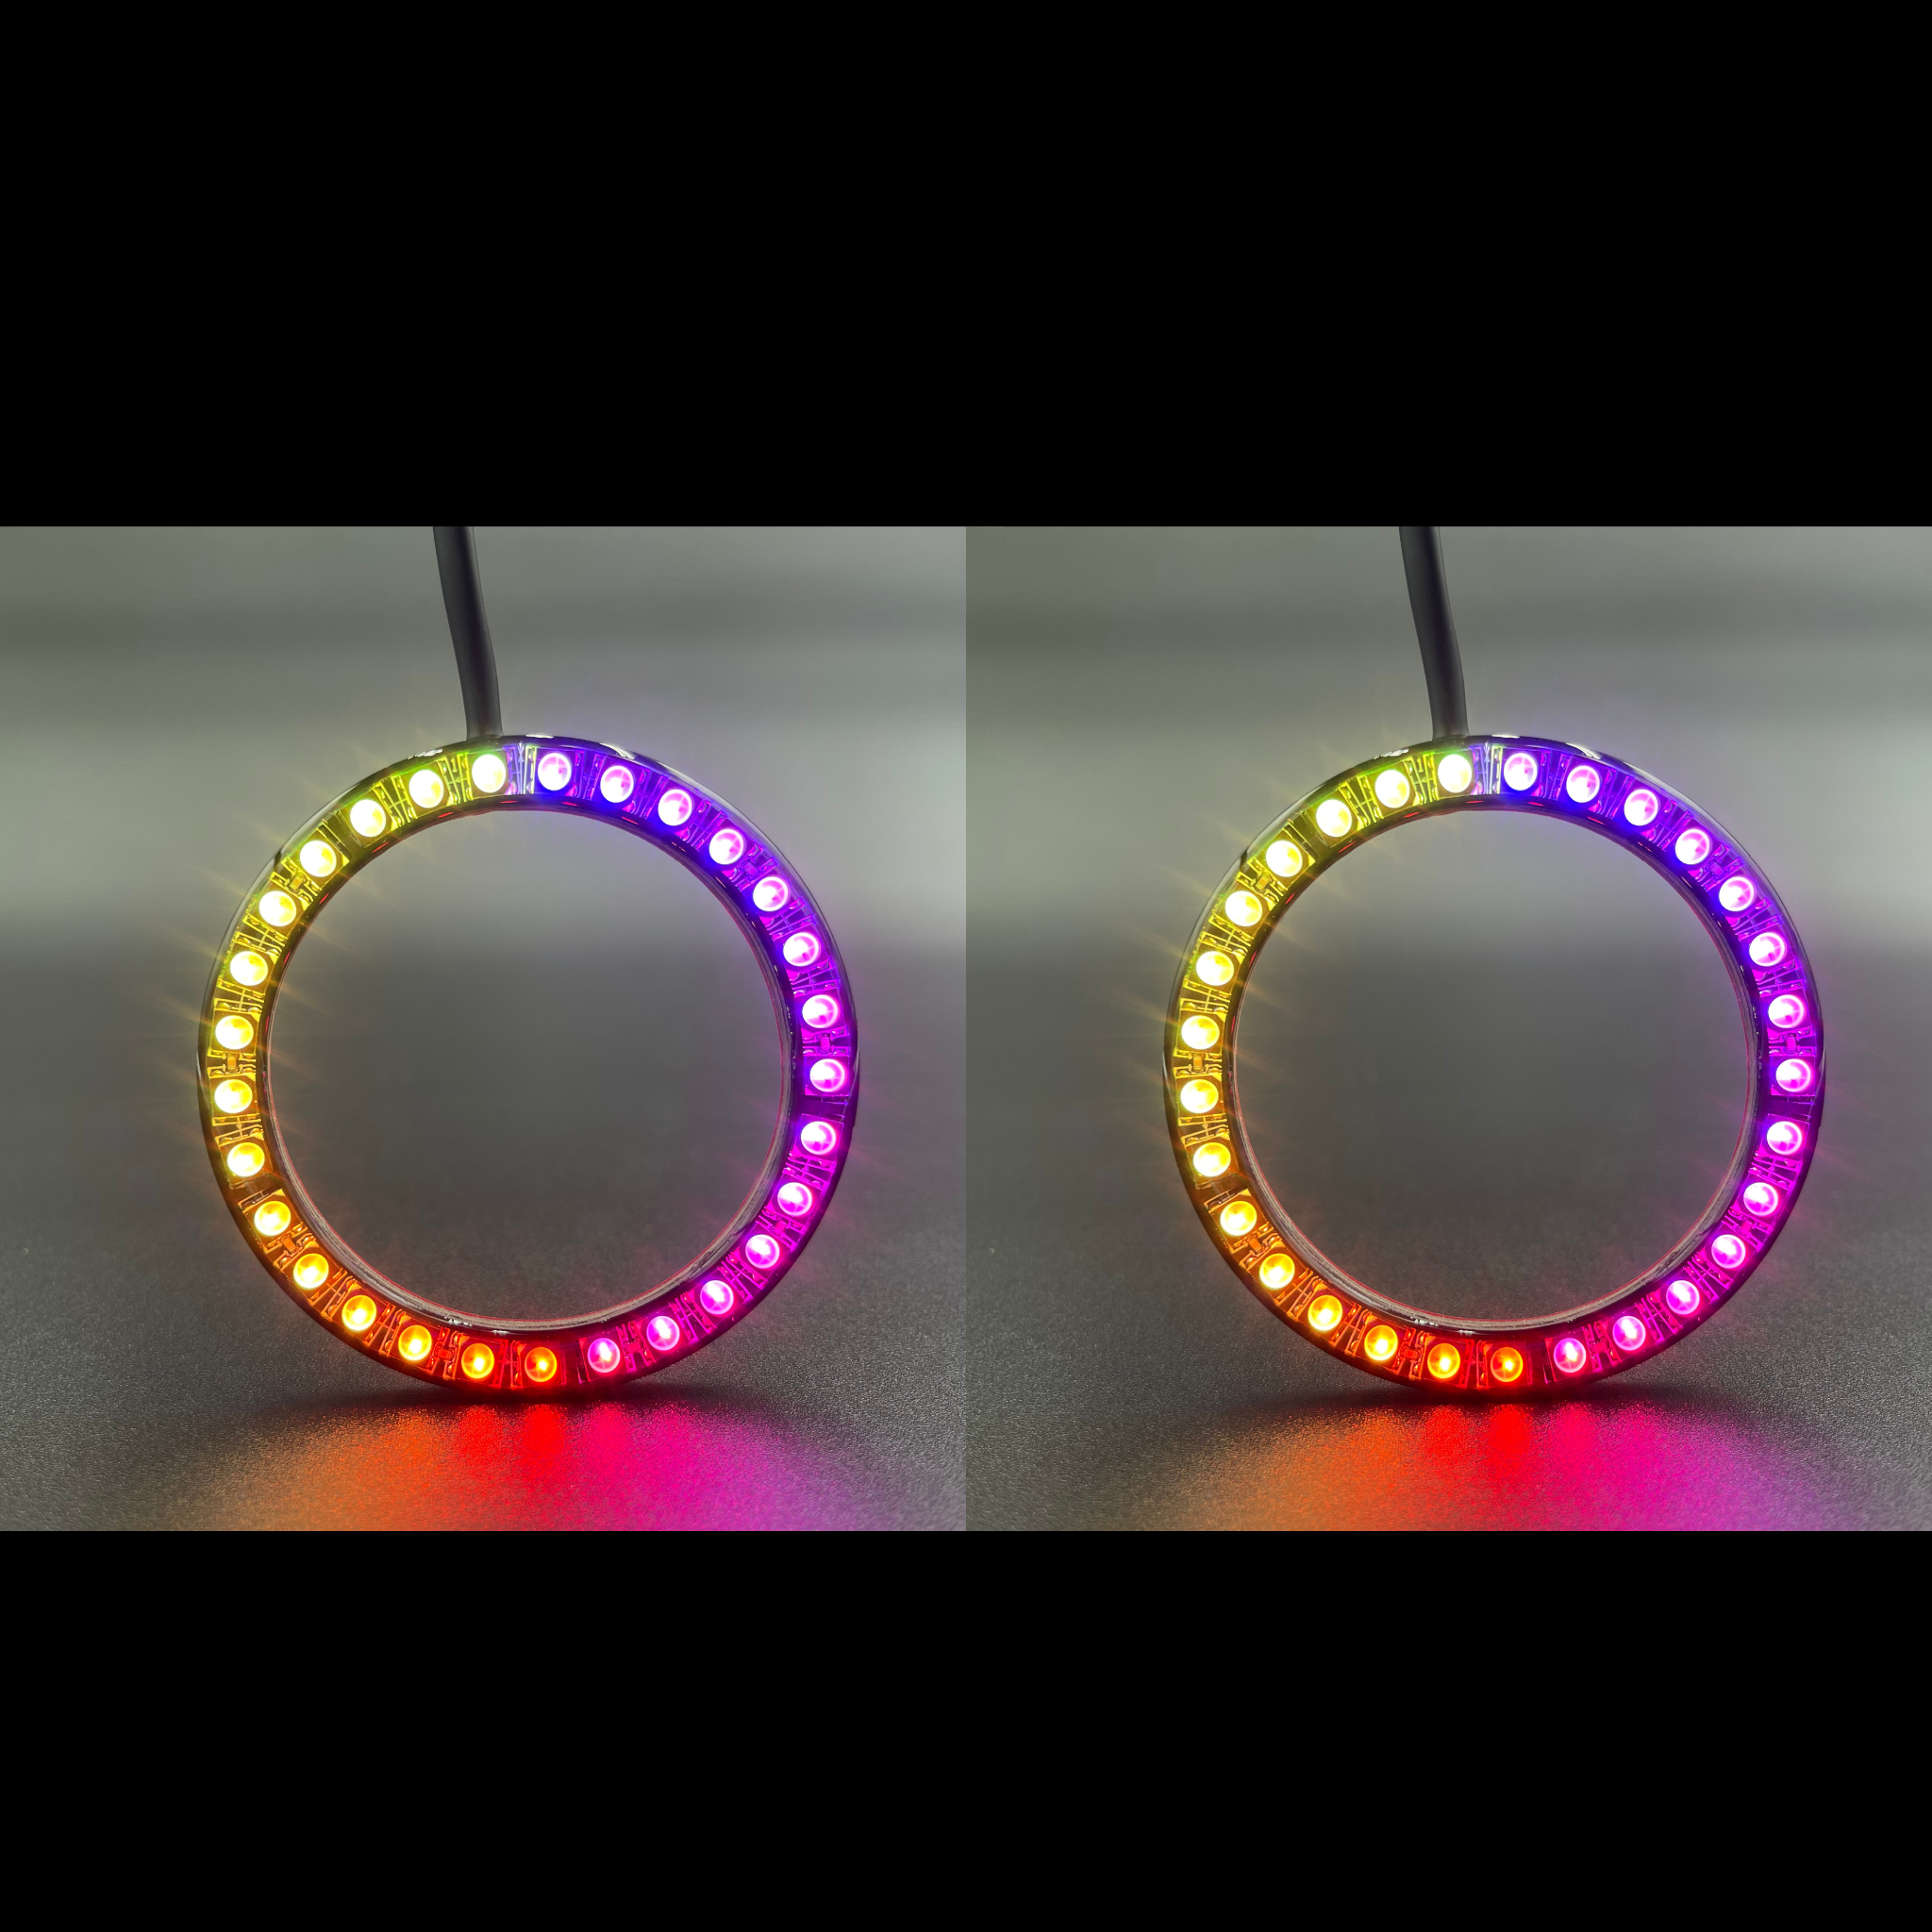 2011-2013 Ford Fiesta Multicolor Halo Kit - RGB Halo Kits Multicolor Flow Series Color Chasing RGBWA LED headlight kit Colorshift Oracle Lighting Trendz OneUpLighting Morimoto theretrofitsource AutoLEDTech Diode Dynamics